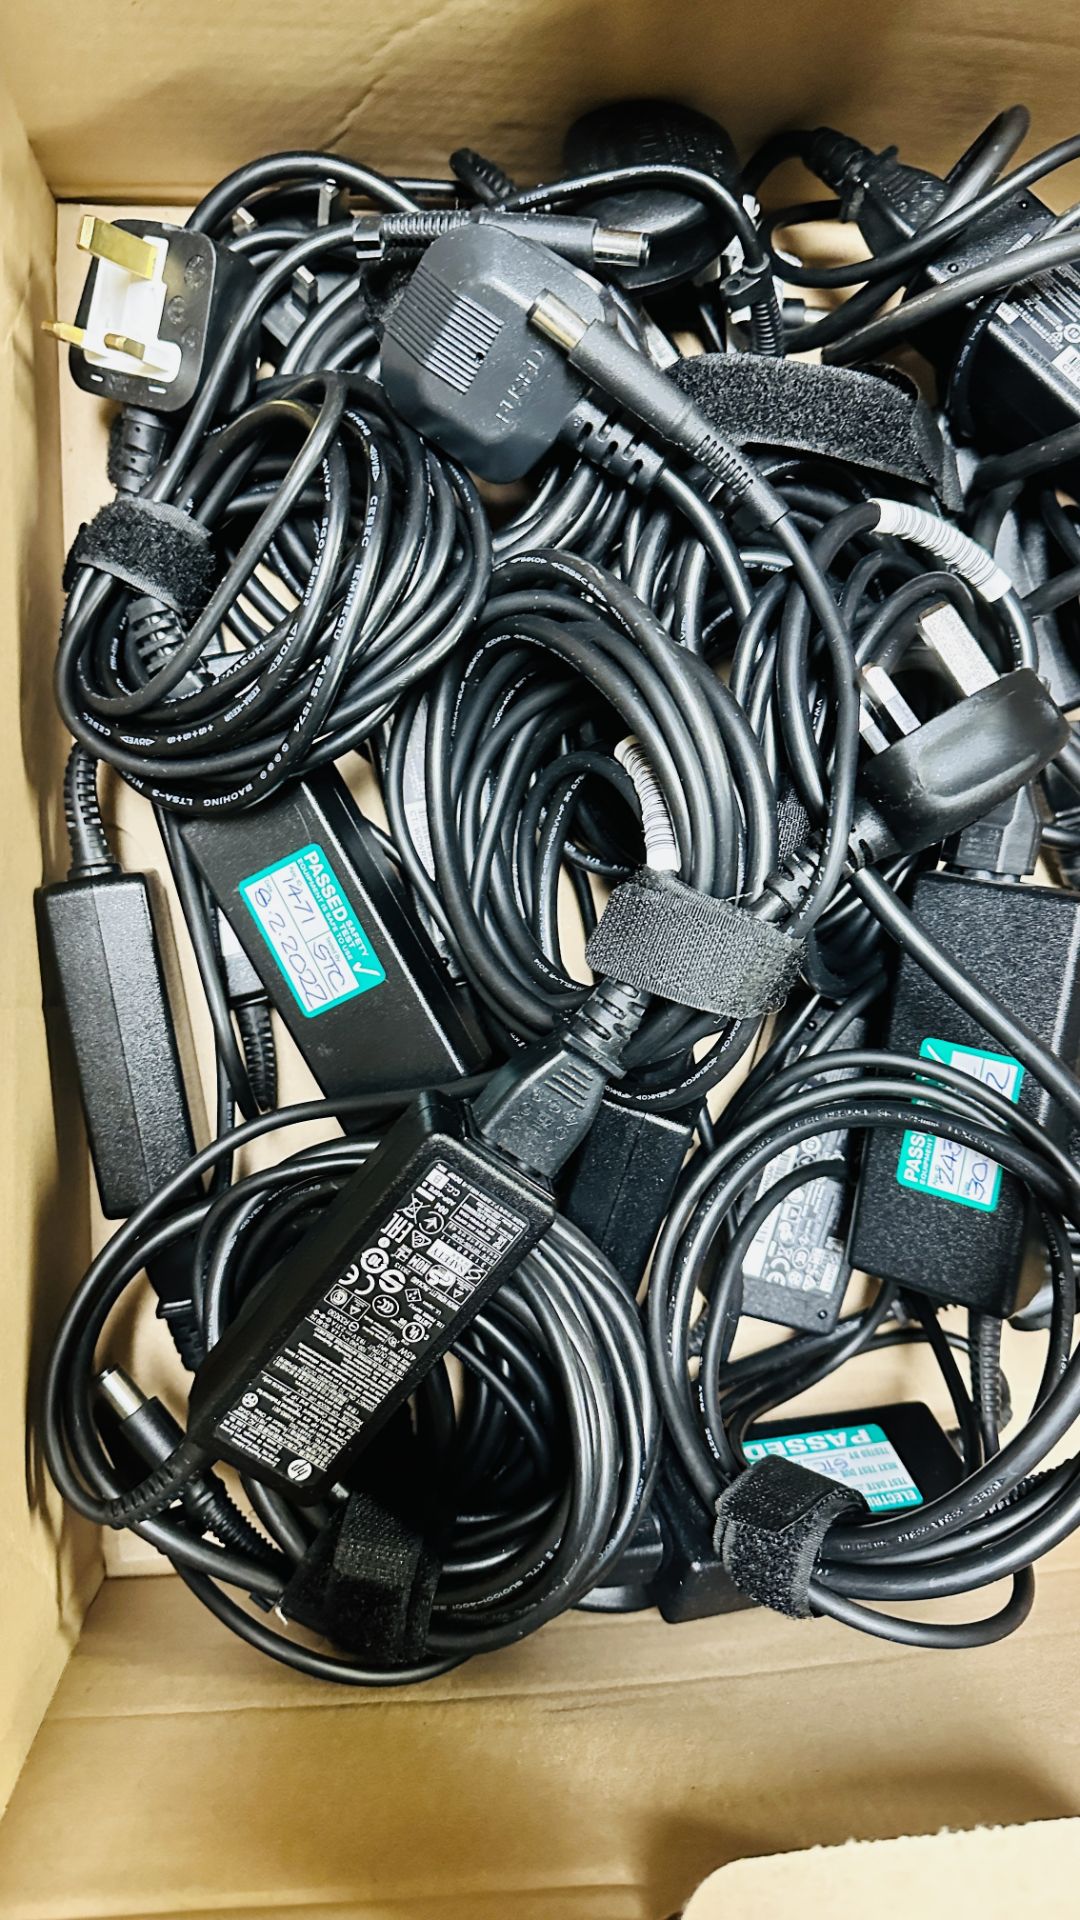 36 X LAPTOP CHARGERS FOR HP LAPTOPS MANY HP 65W AND 45W EXAMPLES - SOLD AS SEEN. - Image 8 of 9